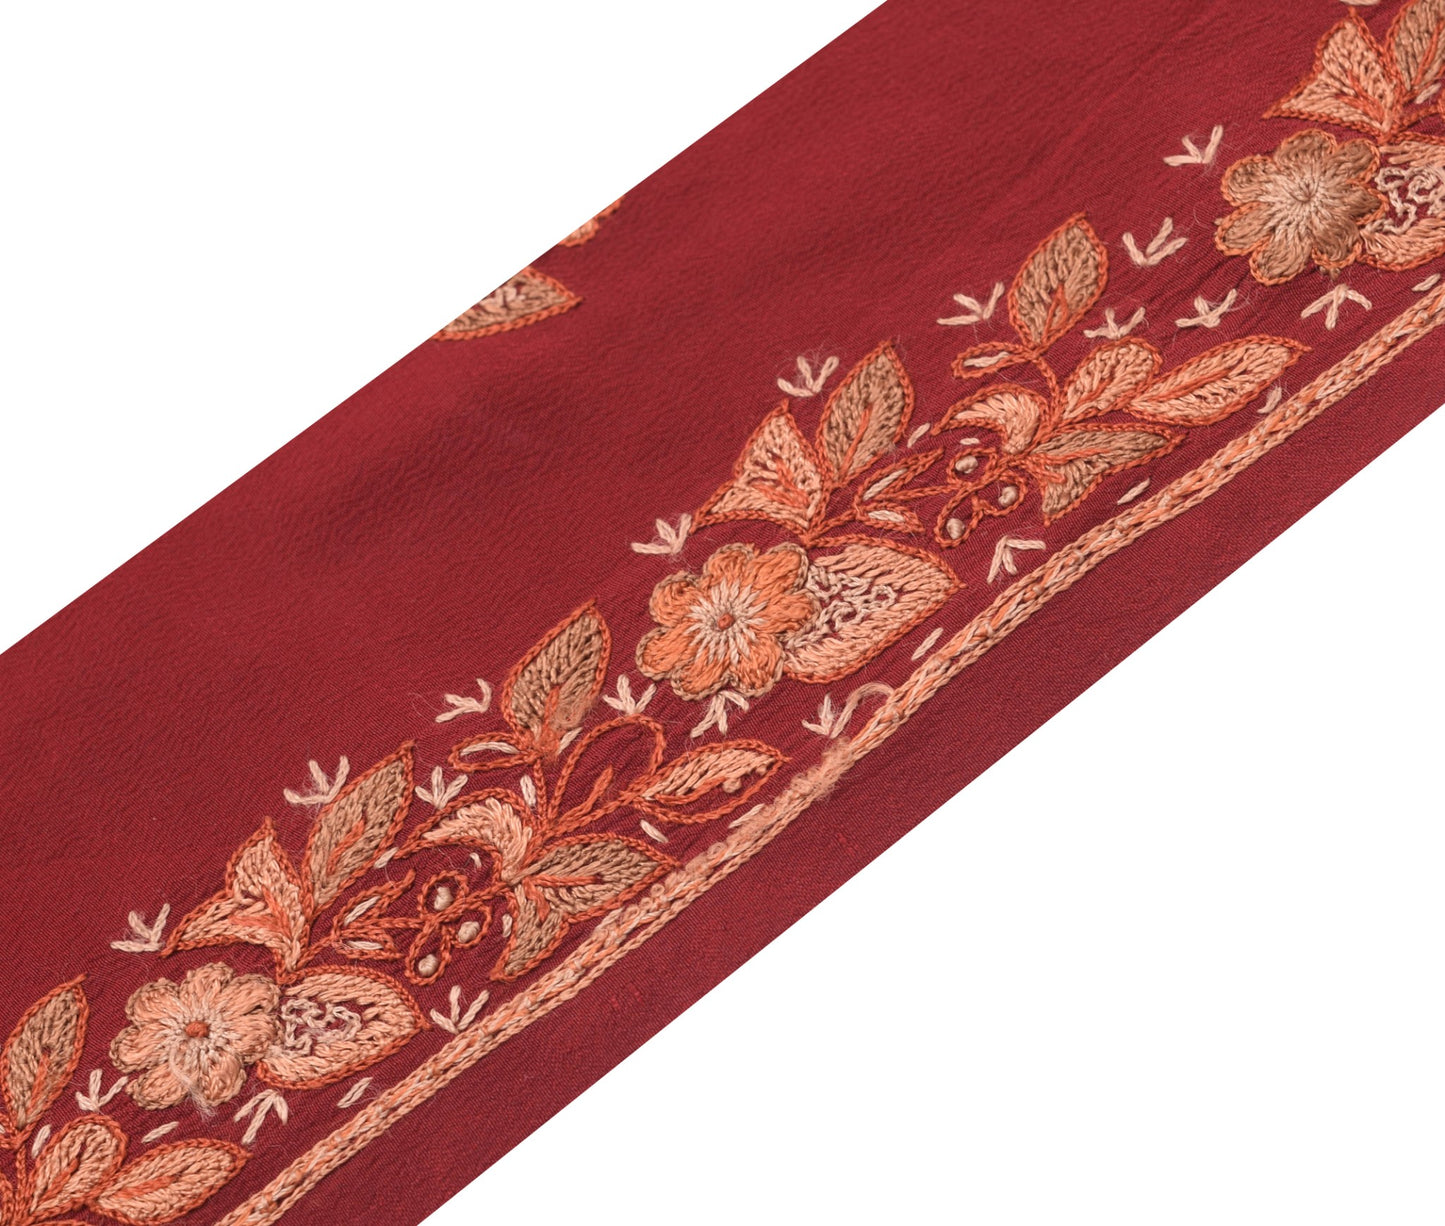 Sushila Vintage Maroon Saree Border Indian Embroidered Craft Sewing Trim Lace